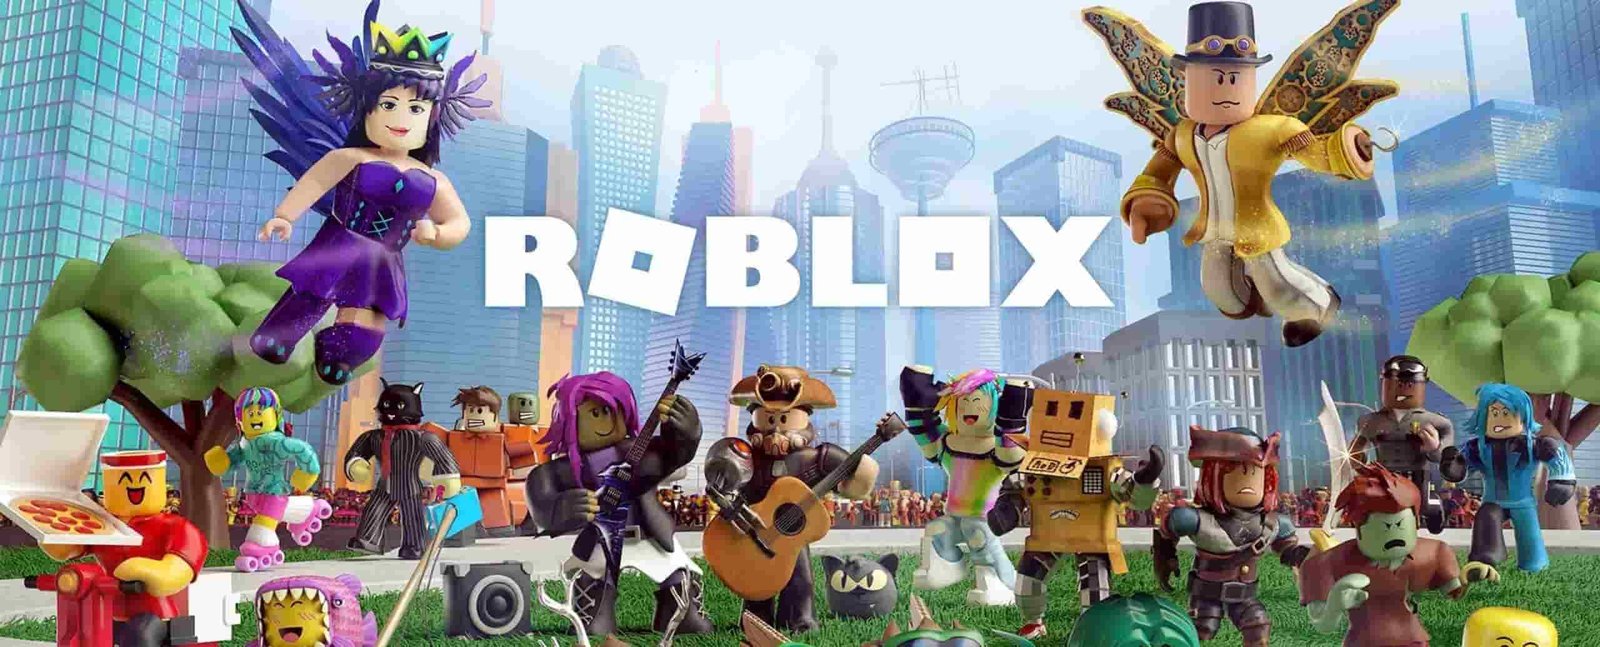 Roblox Voice Chat Feature Might Only Work For 18 Users Suggests Code Digistatement - roblox voice chatg